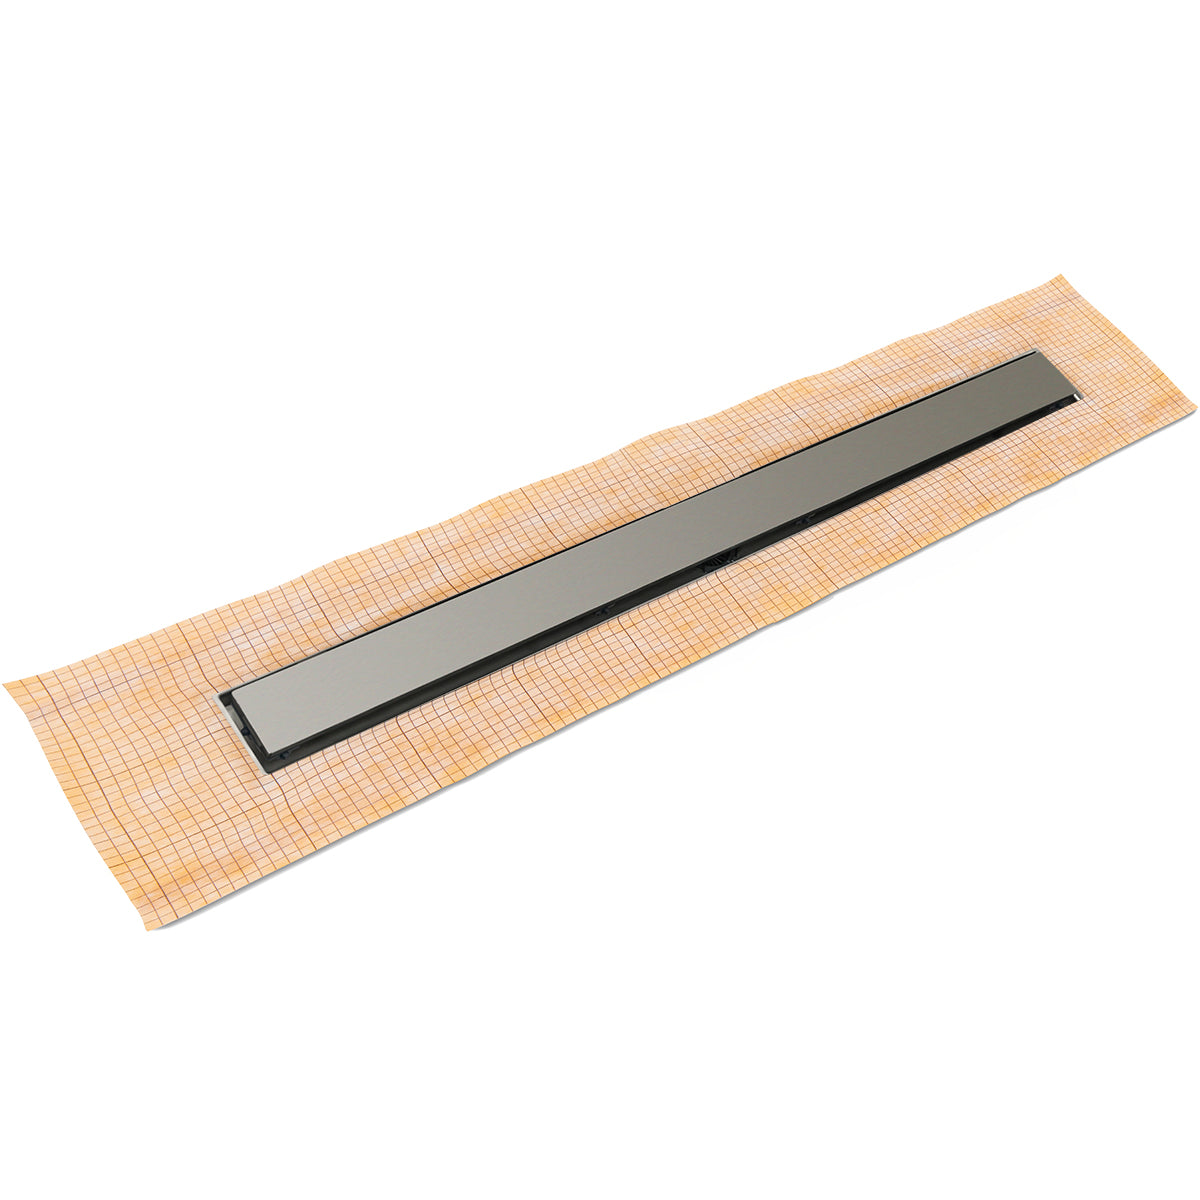 Infinity Drain 24" FCS Series Schluter-Kerdi - Fixed Flange Linear Drain Kit with 2 1/2" Solid Grate